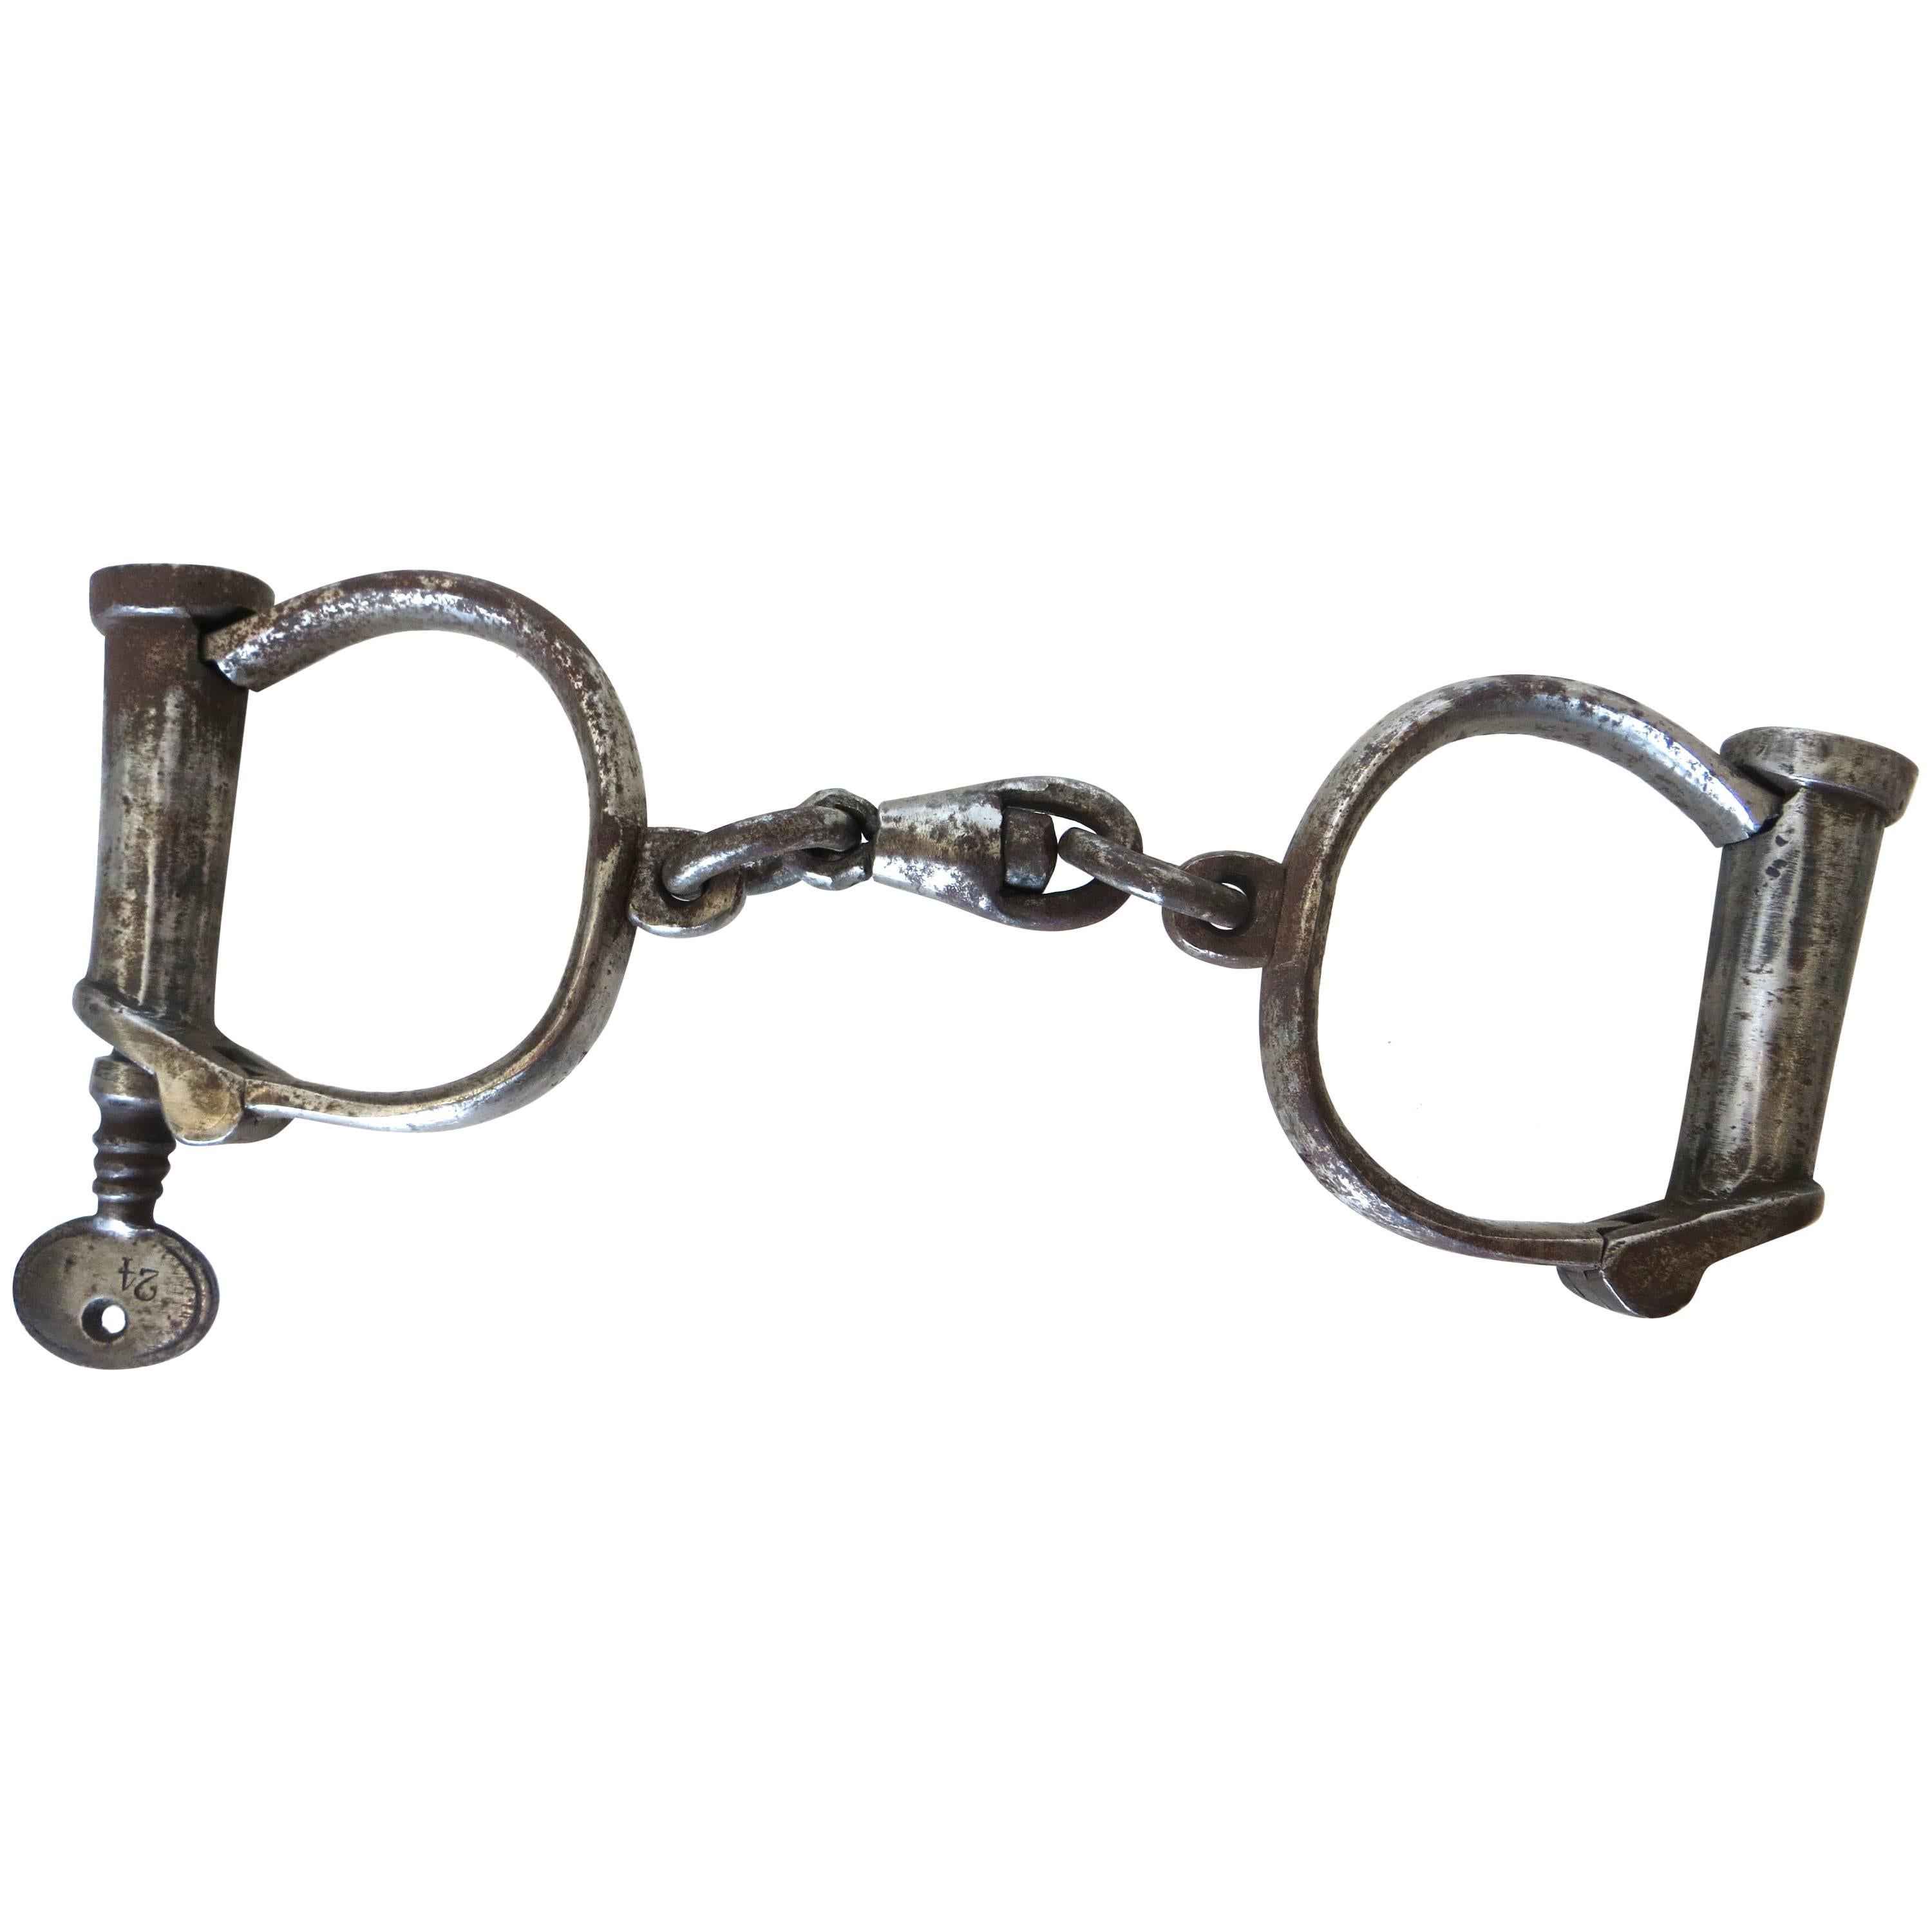 Handcuffs by Hiatt, England 'Prop From Magician' Labeled#24, circa 1870